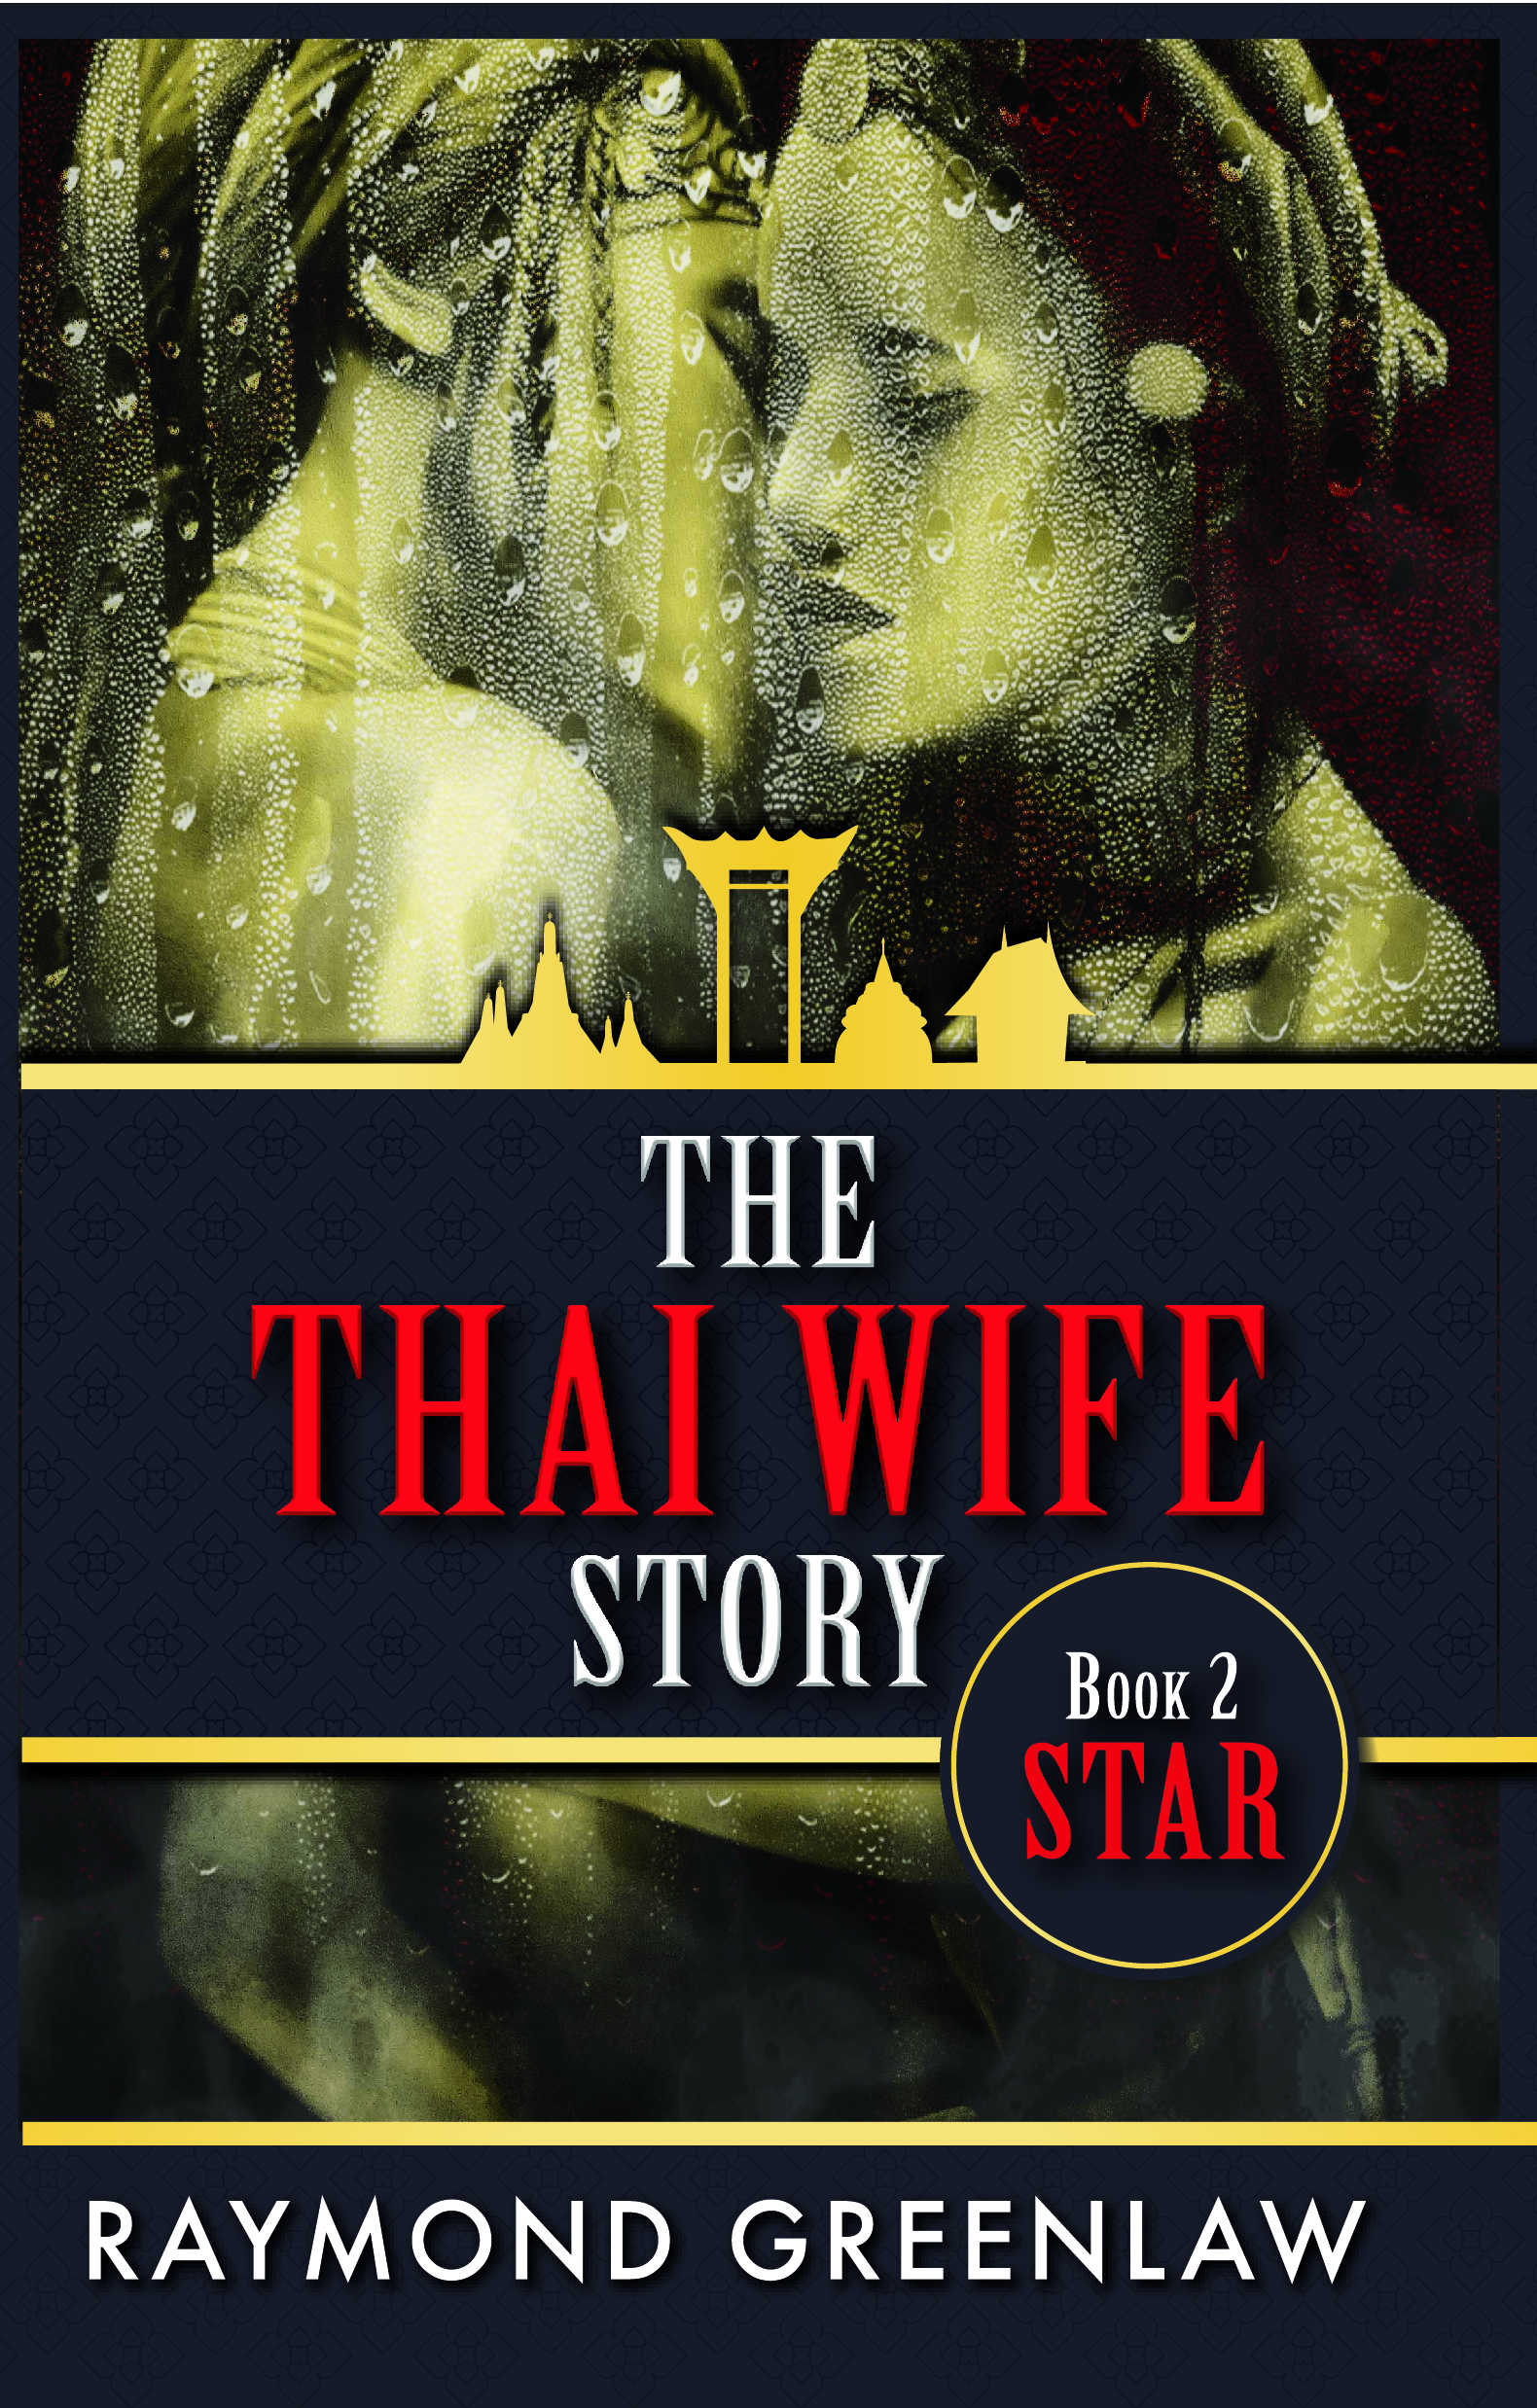 The Thai Wife Story Star